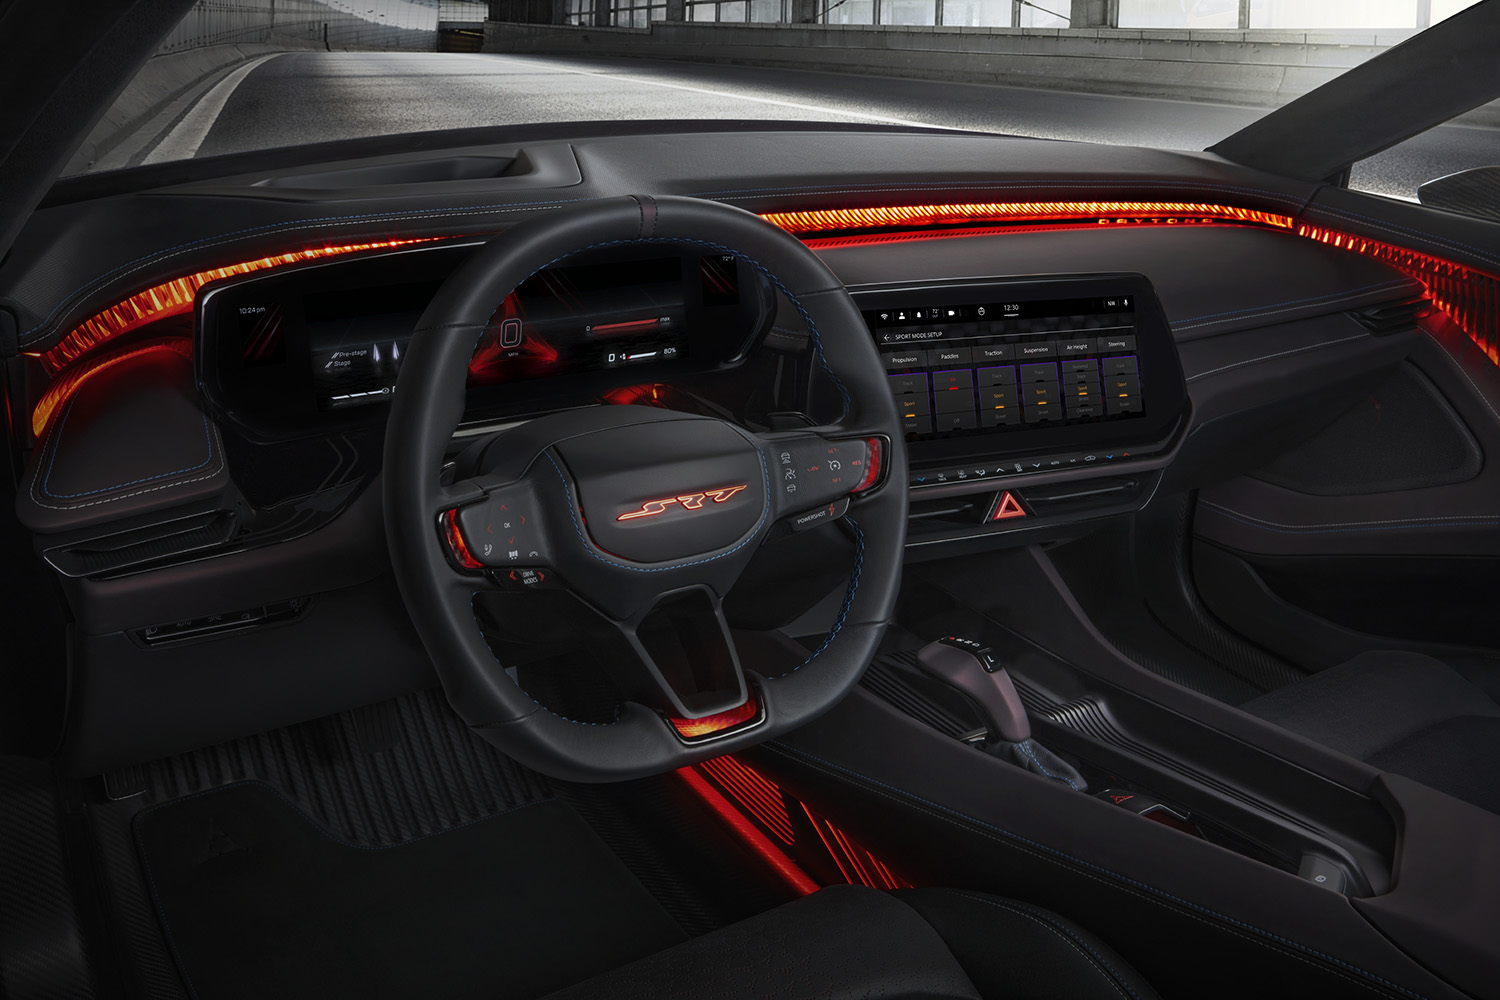 A new steering wheel design for the Dodge Charger Daytona SRT Concept offers a thinner feel, with a flat top and bottom, and an illuminated red SRT logo lights up the steering wheel center.